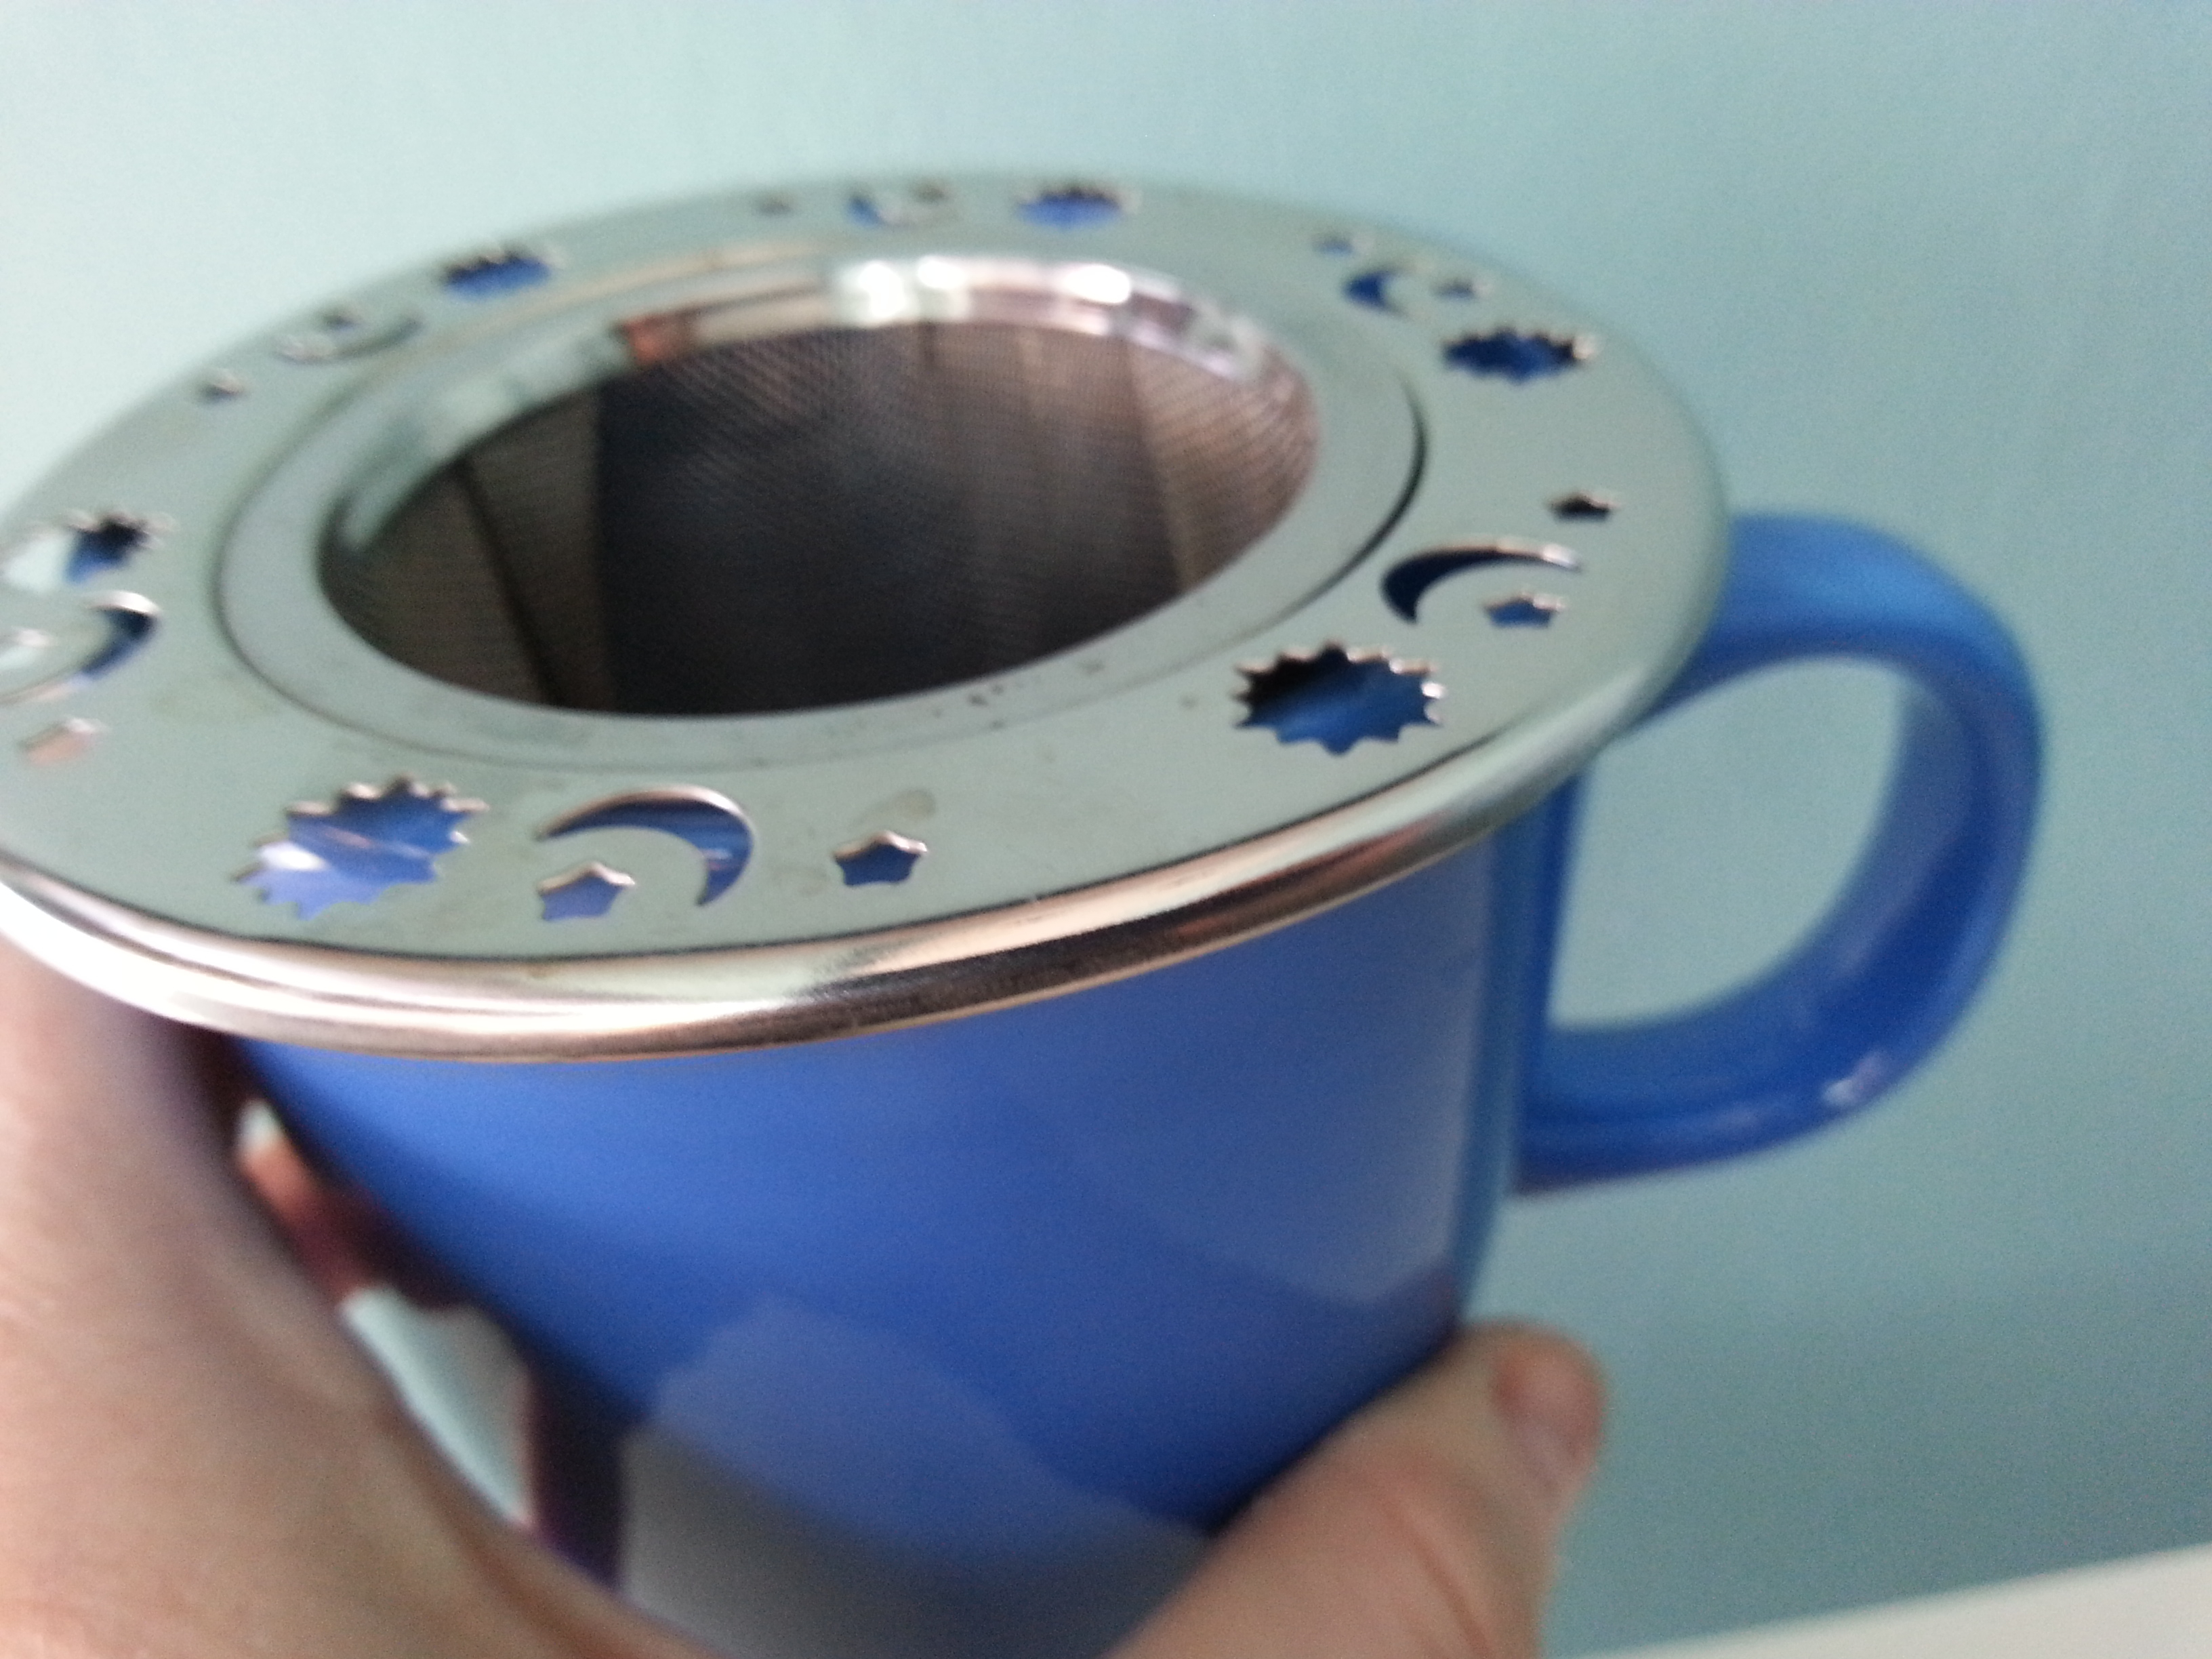 celestial tea strainer sits right inside your favorite tea cup